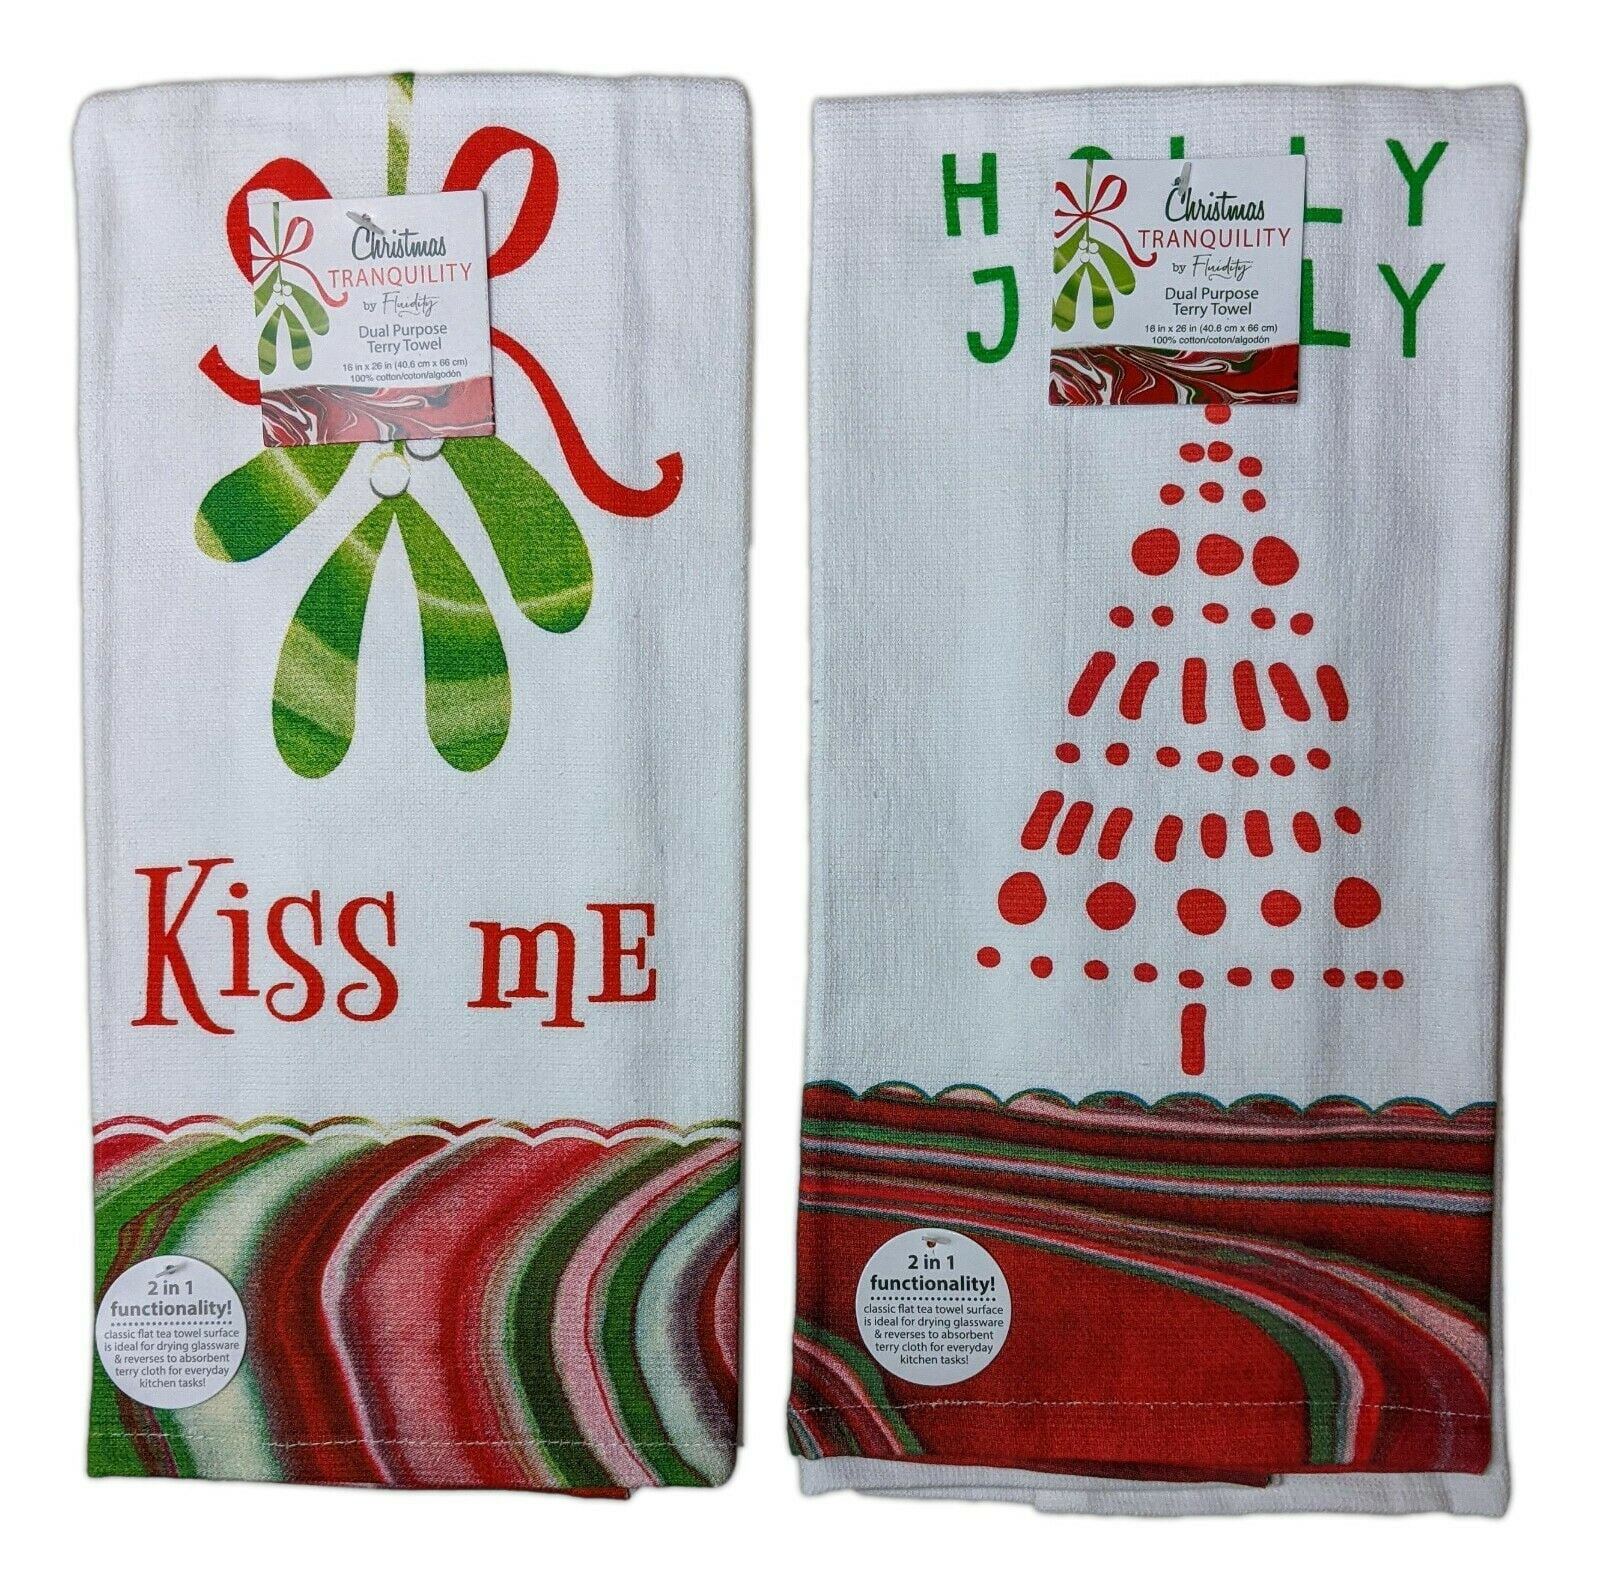 Details about   SET of 2 PRINTED VELOUR KITCHEN TOWELS 15"x25" Merry Christmas 